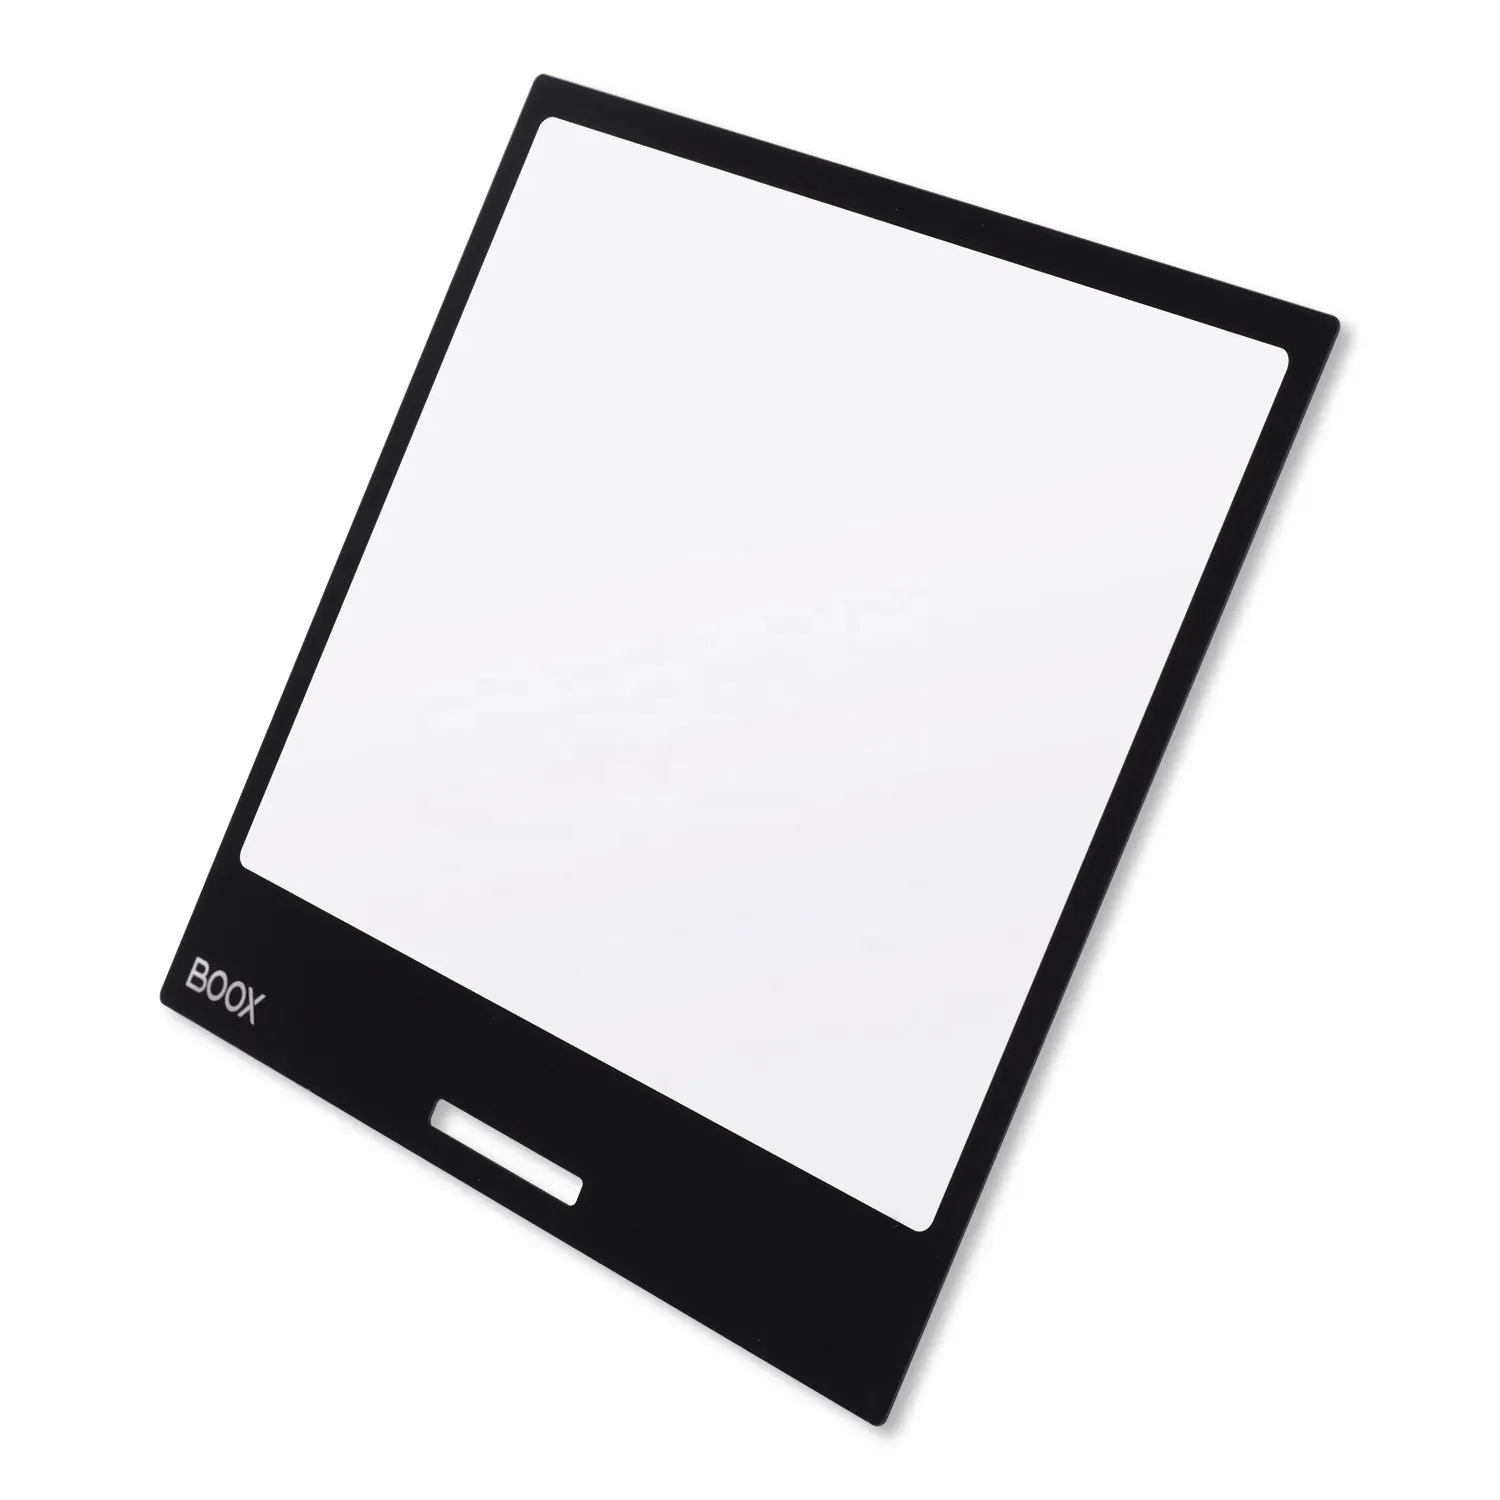 Hot sell Touch Screen Silk-screen Printing Glass Panel Protection Cover for home appliances